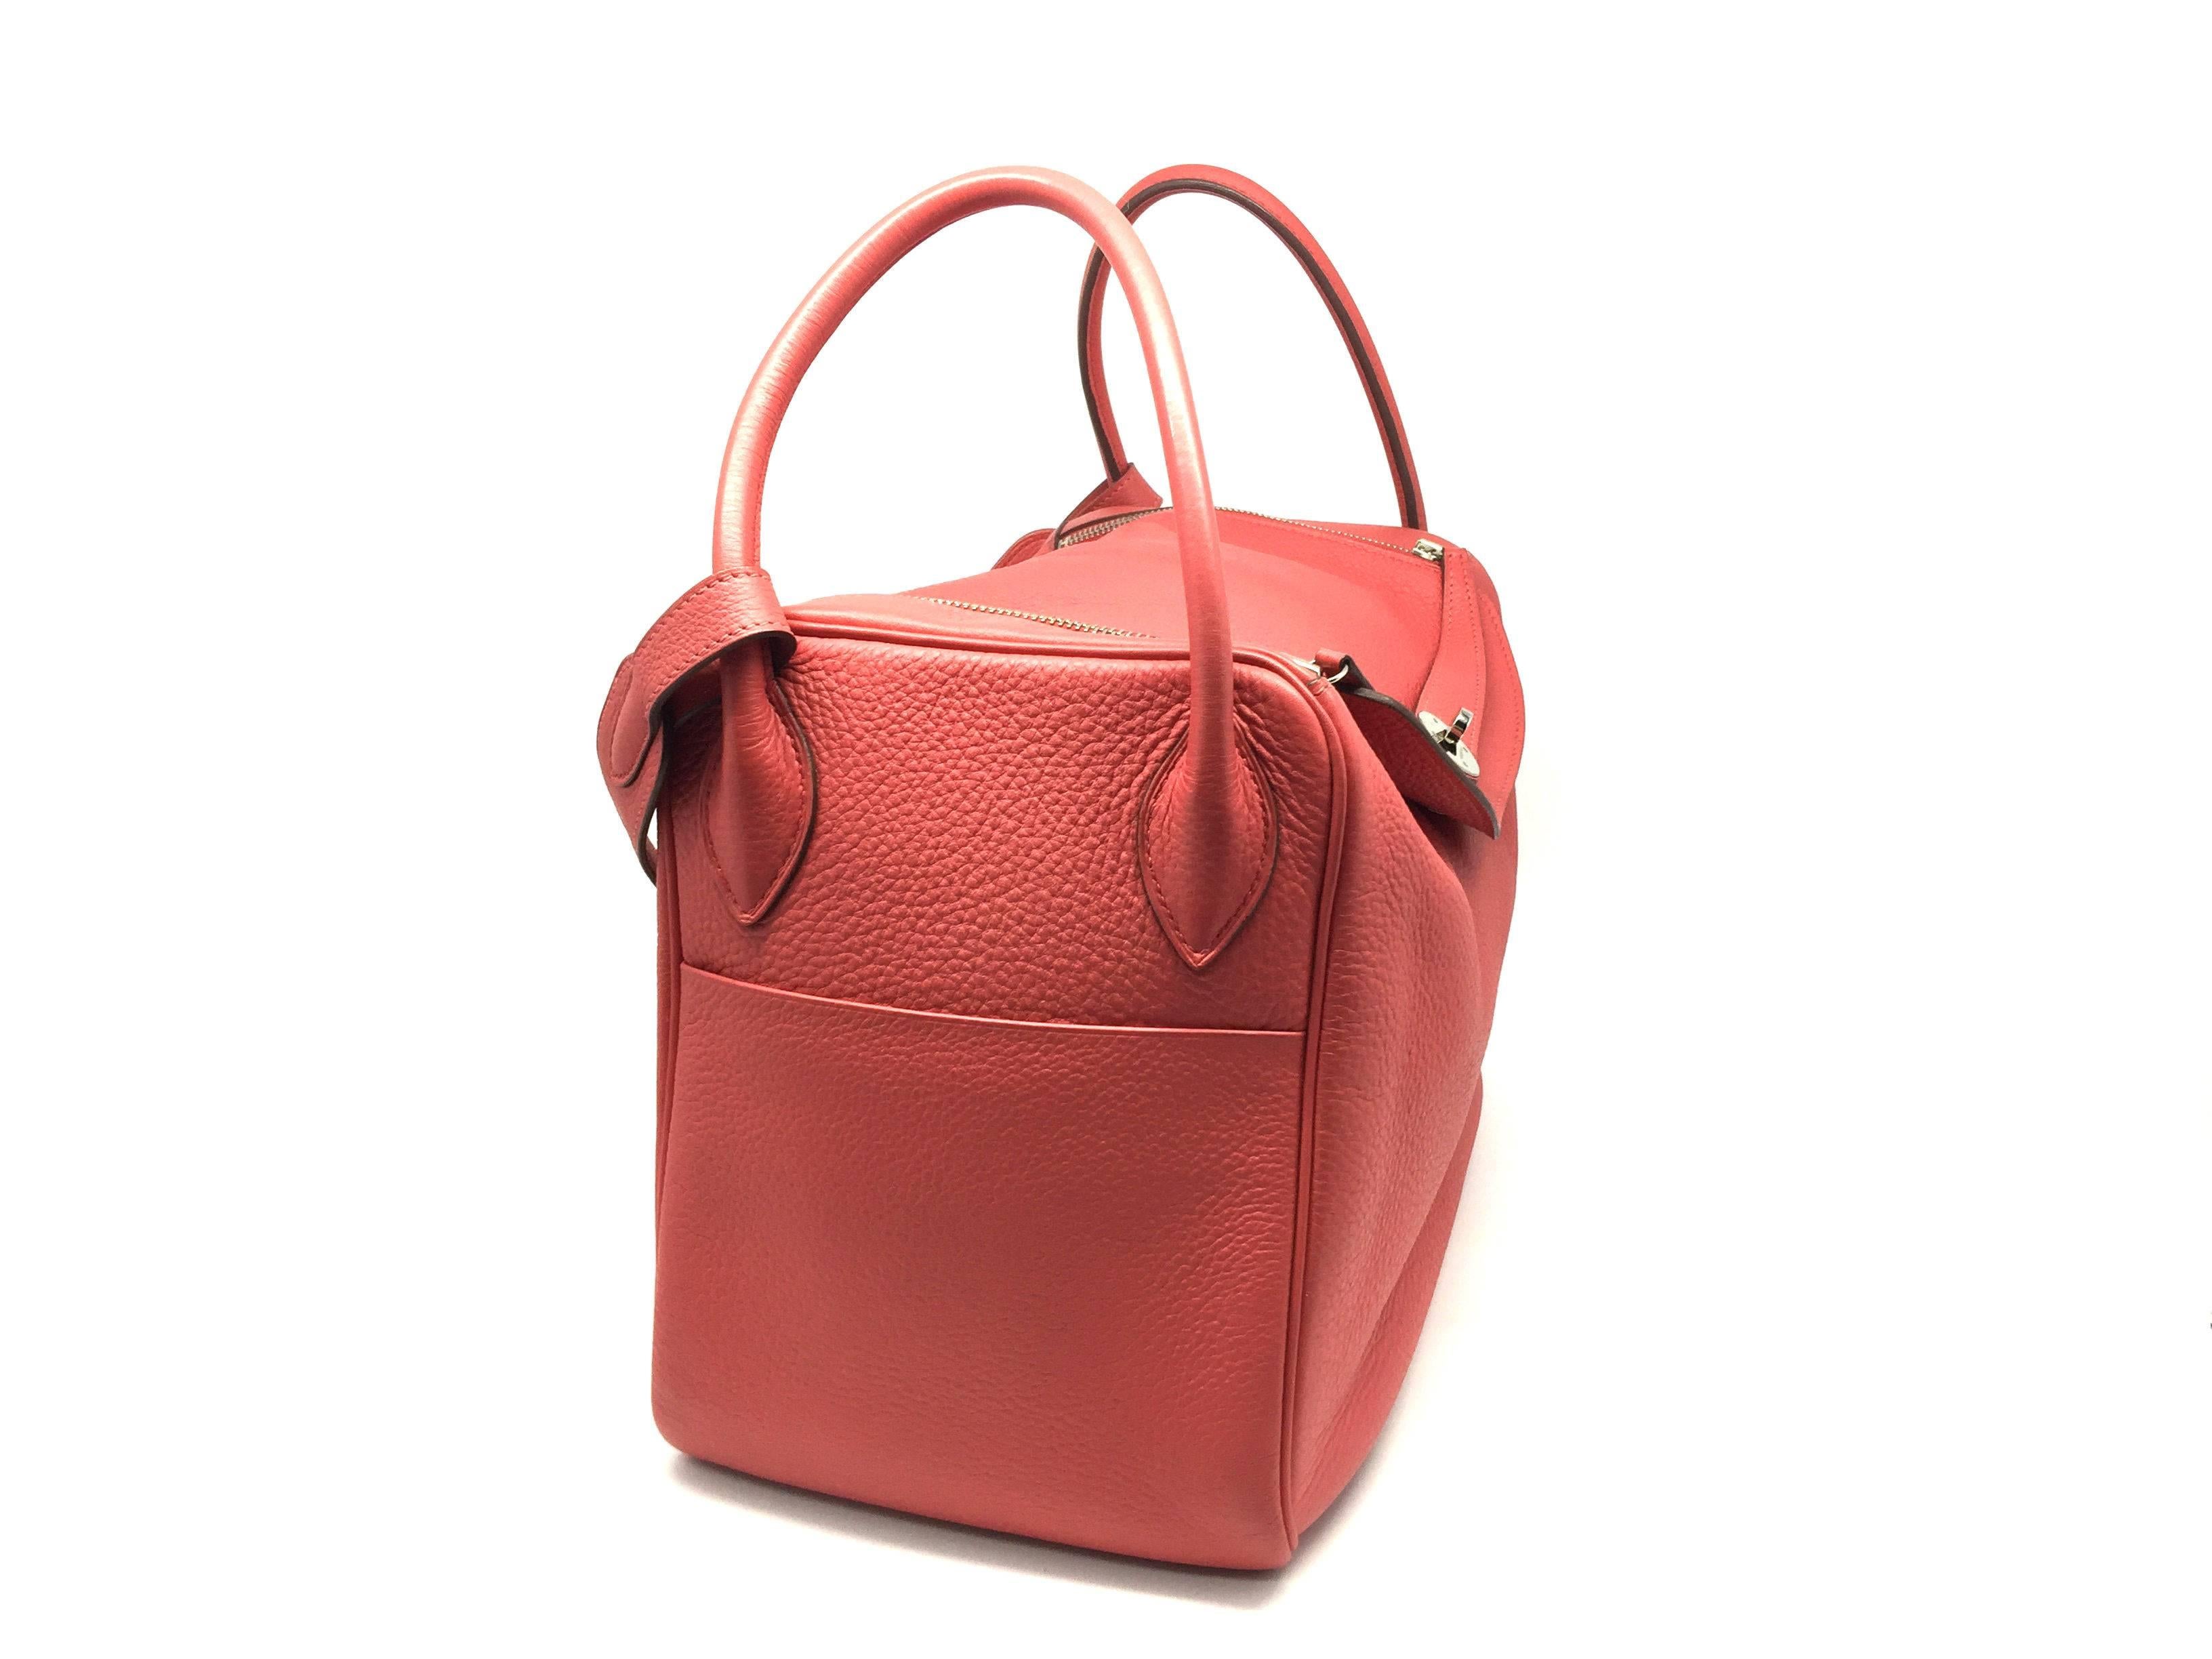 Color: Light Red / Rouge Pivoine (designer color)
Material: Taurillon Clemence Leather

Condition:
Rank B
Overall: Fair. Few defects
Surface:Minor Stains 
Corners:Minor Stains 
Edges:Minor Scratches
Handles/Straps:Obvious Scratches &